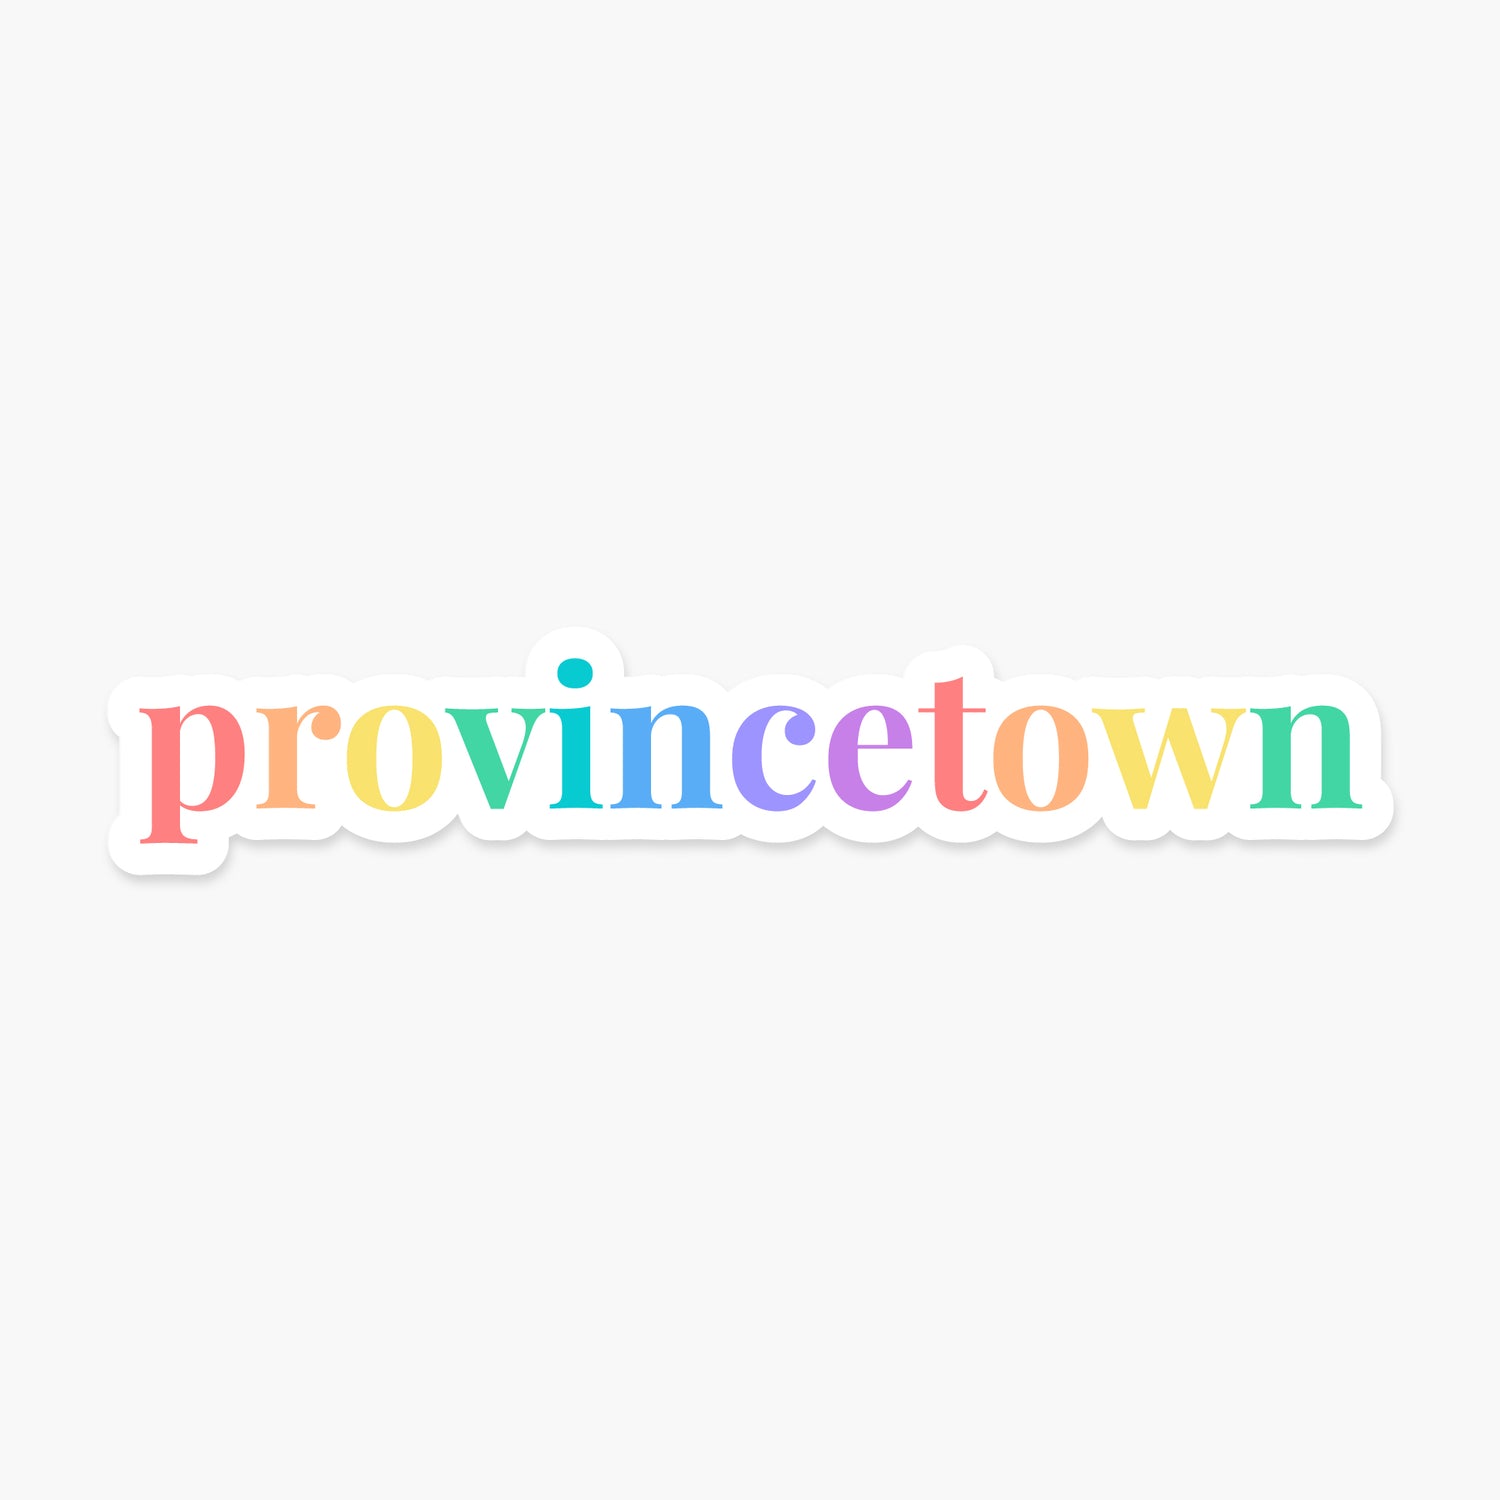 Provincetown, Massachusetts - Everyday Sticker | Footnotes Paper